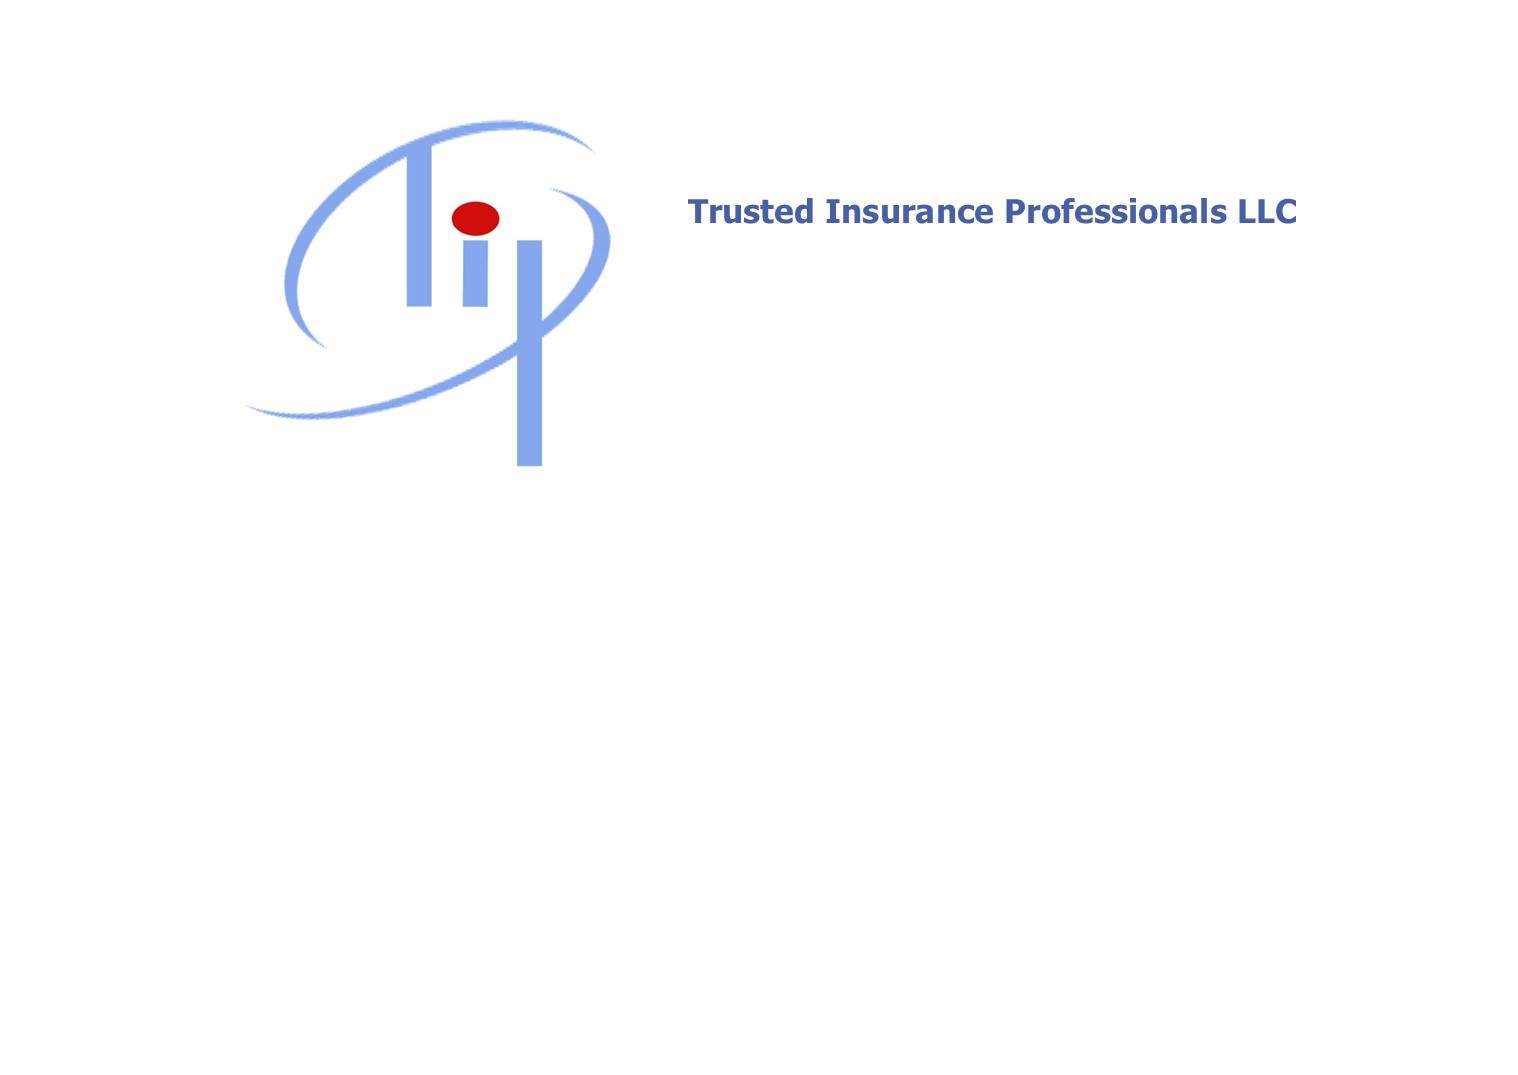 Trusted Insurance Professionals Logo